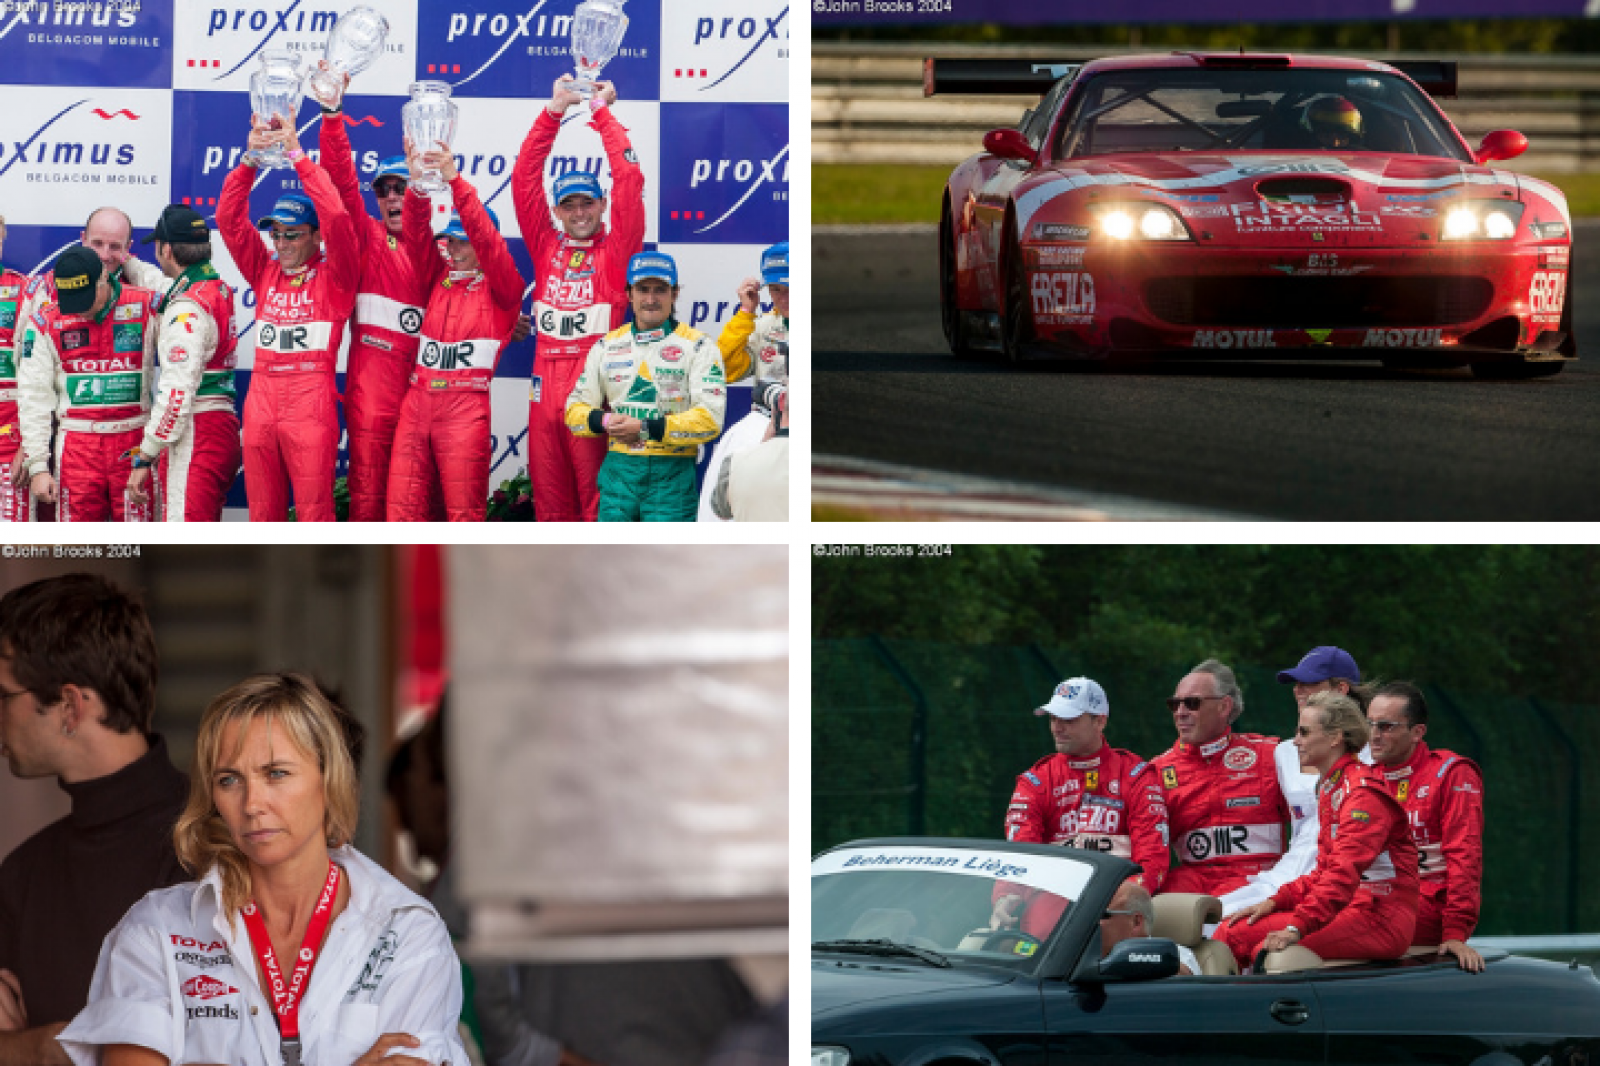 Throwback Thursday -  Lilian Bryner makes history at the 2004 Spa 24 Hours